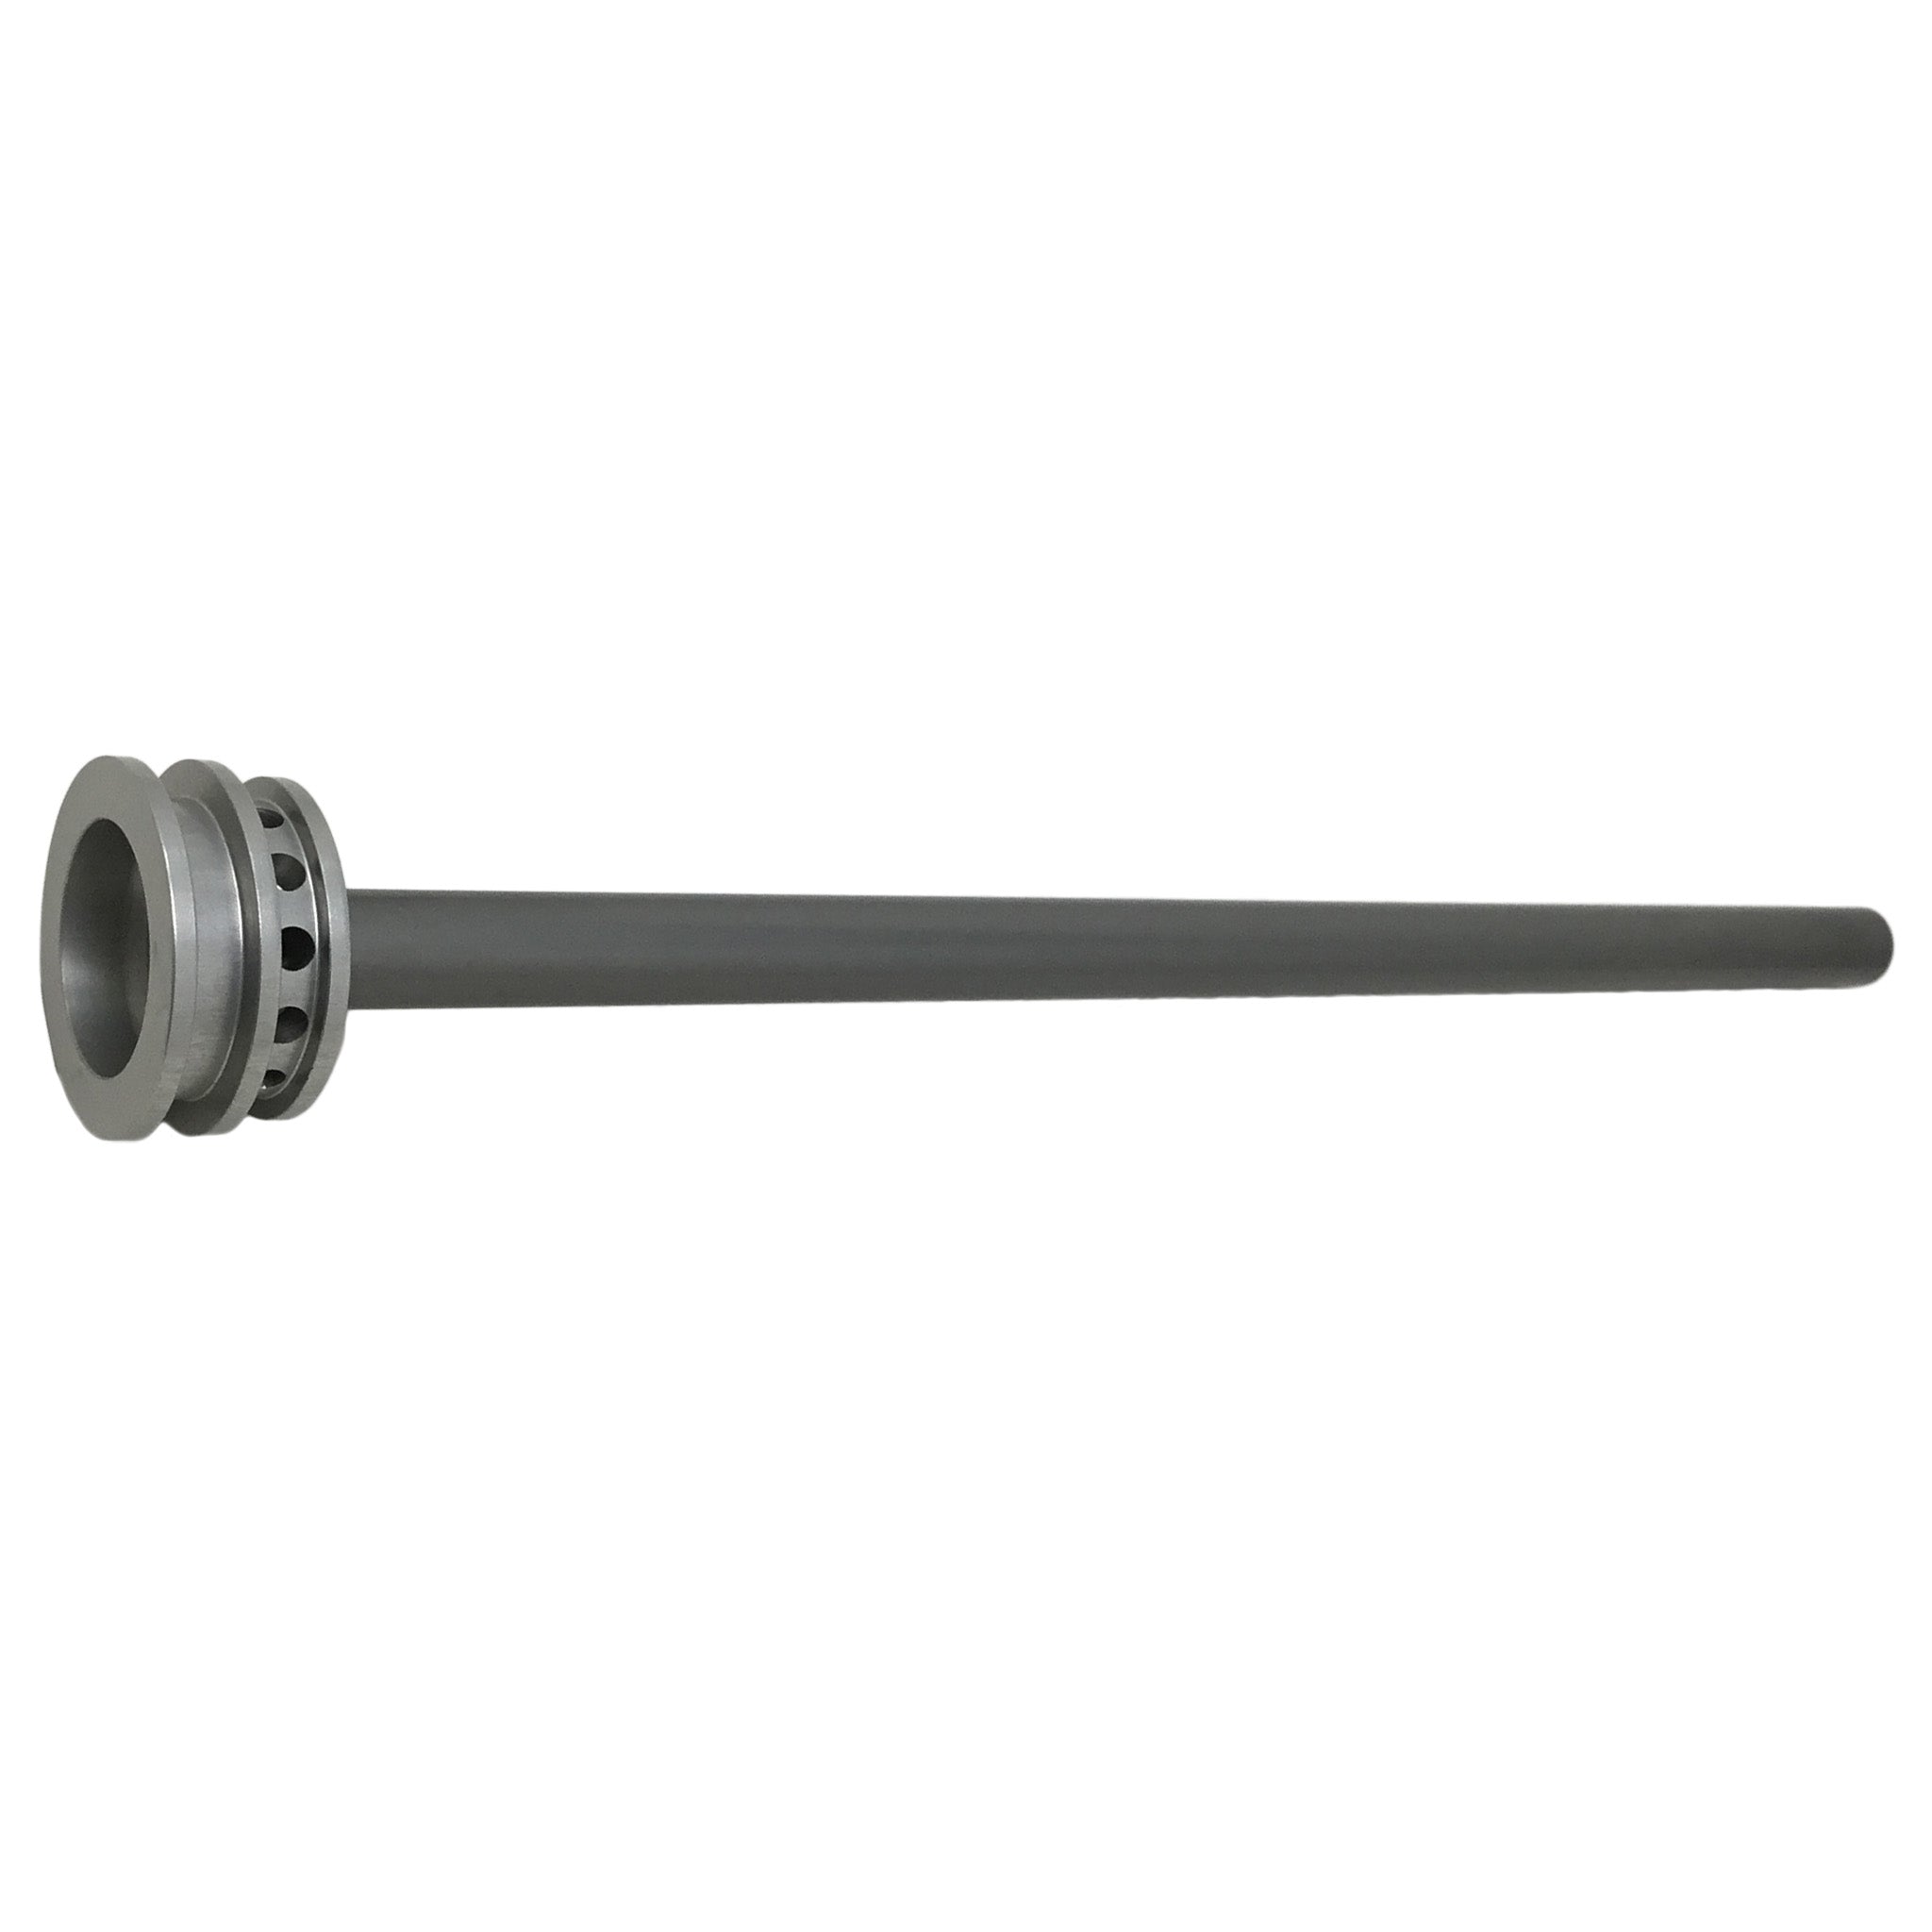 MRP Fullfil air rod assembly Stage 34mm (27.5")